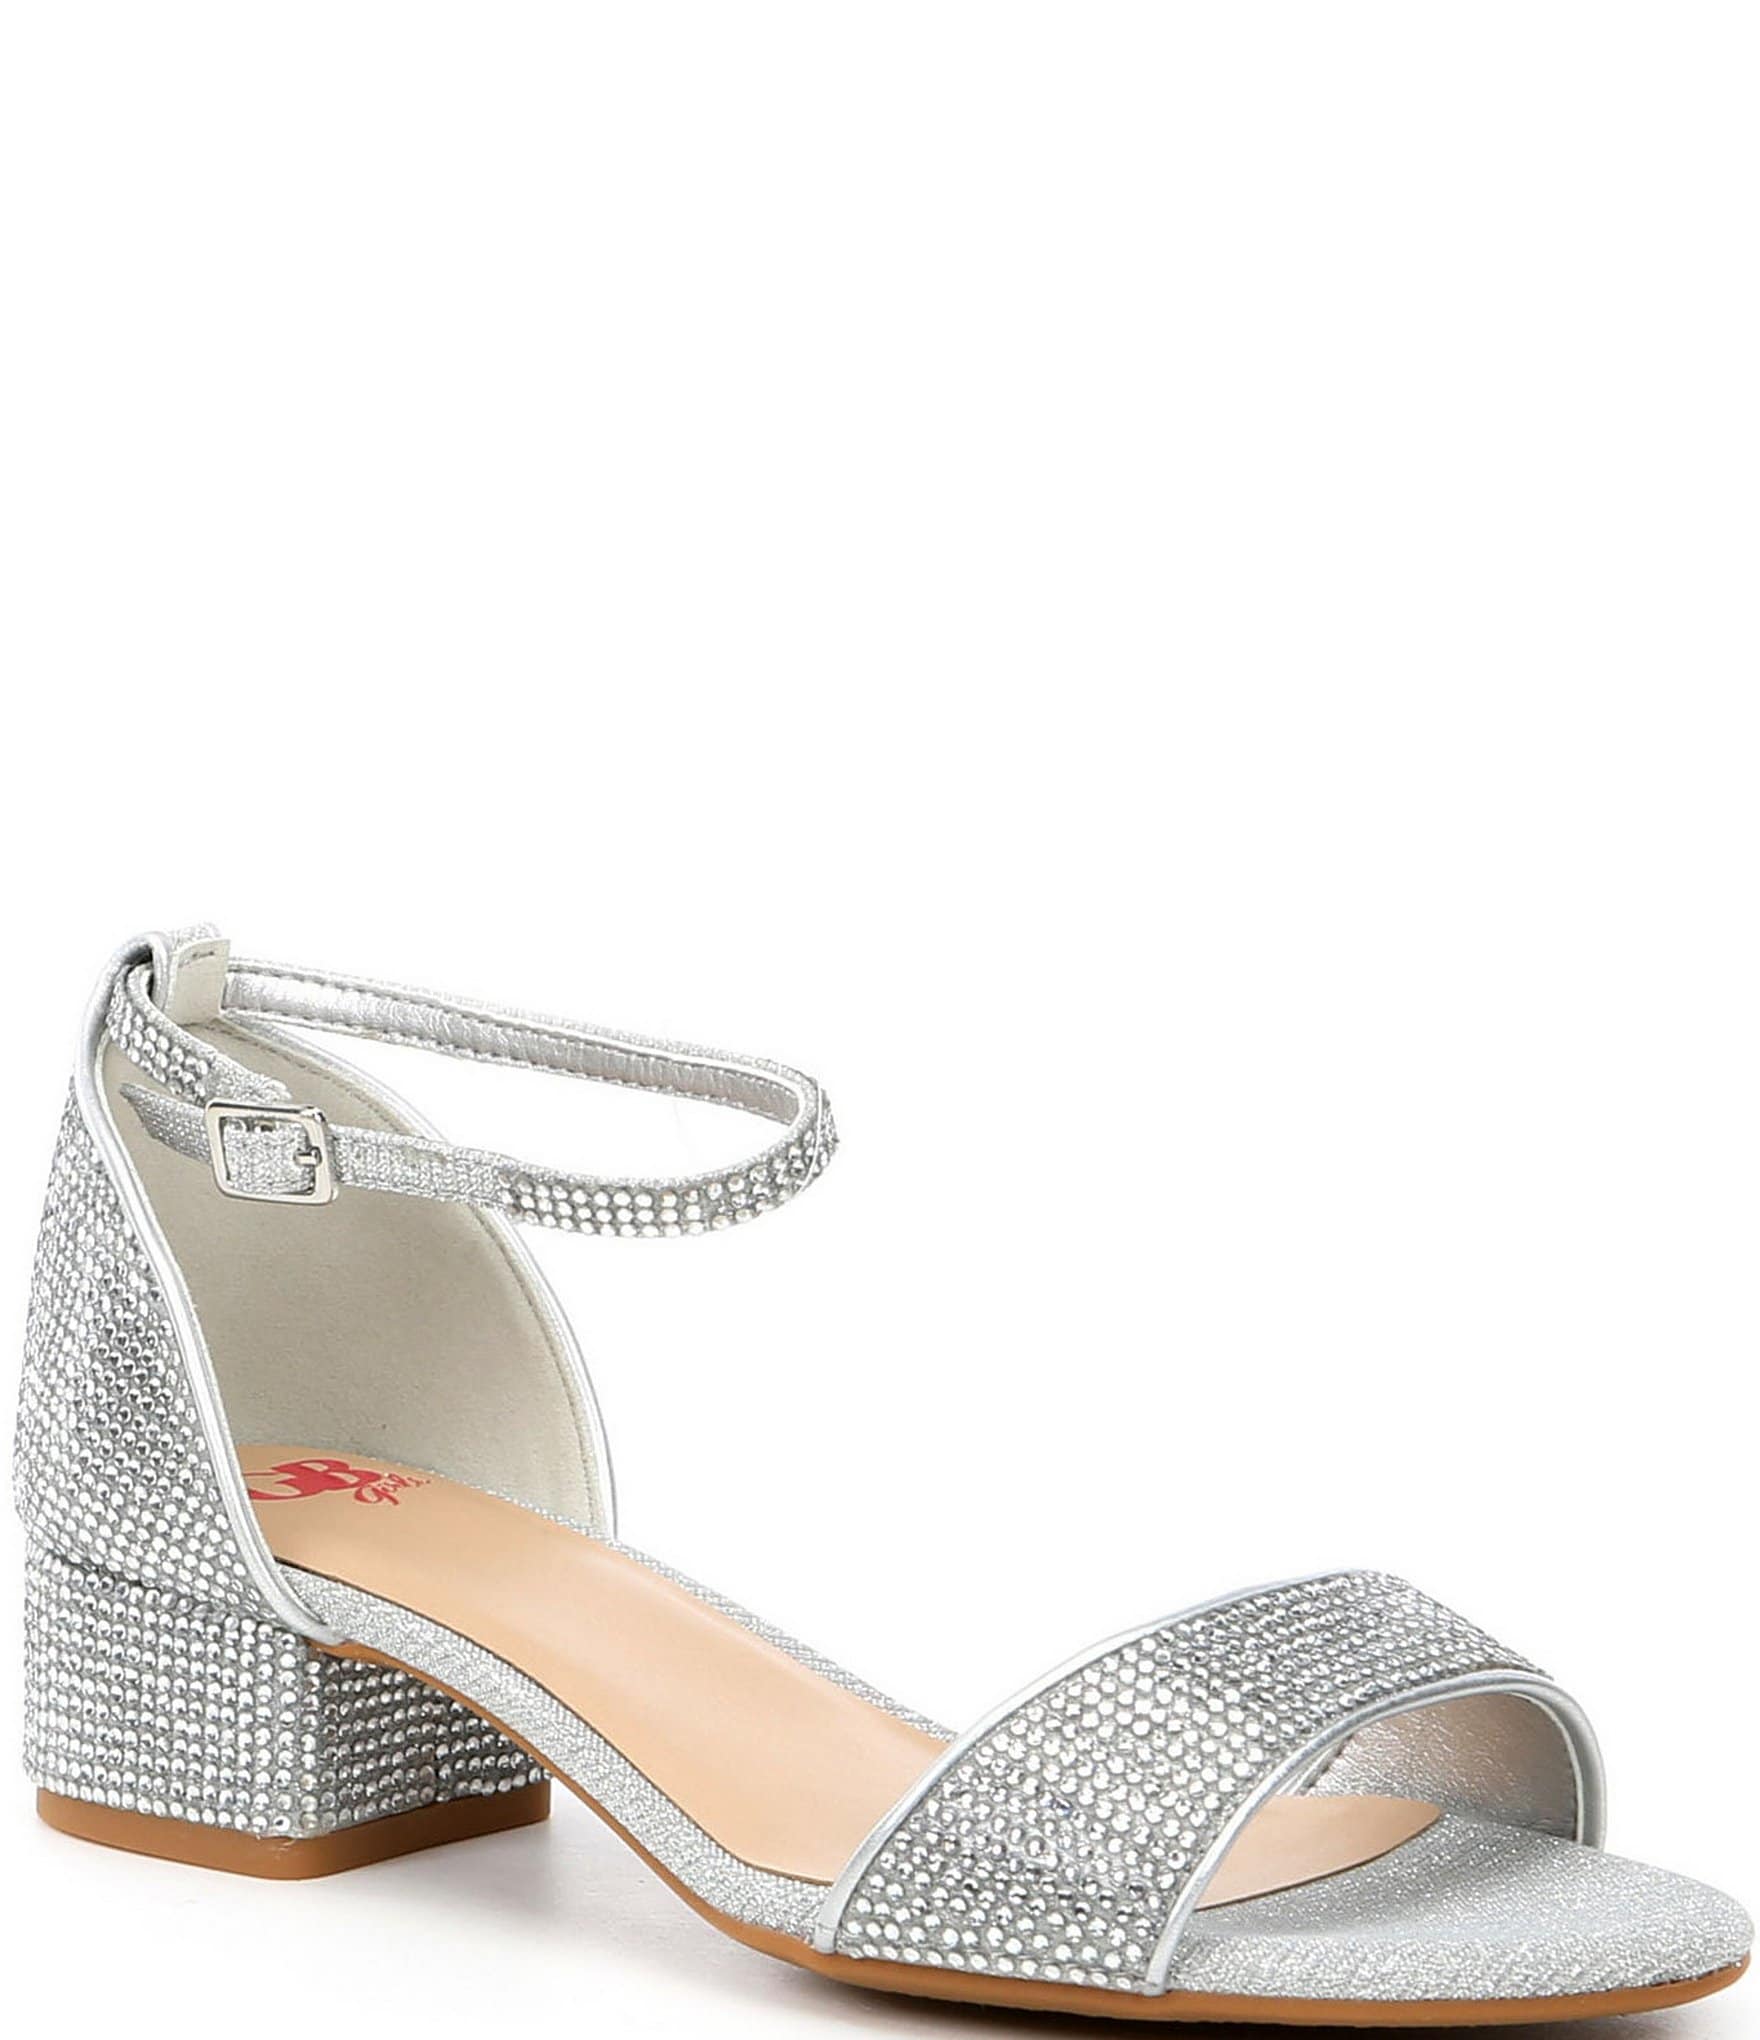 Girls Party Shoes in Silver 